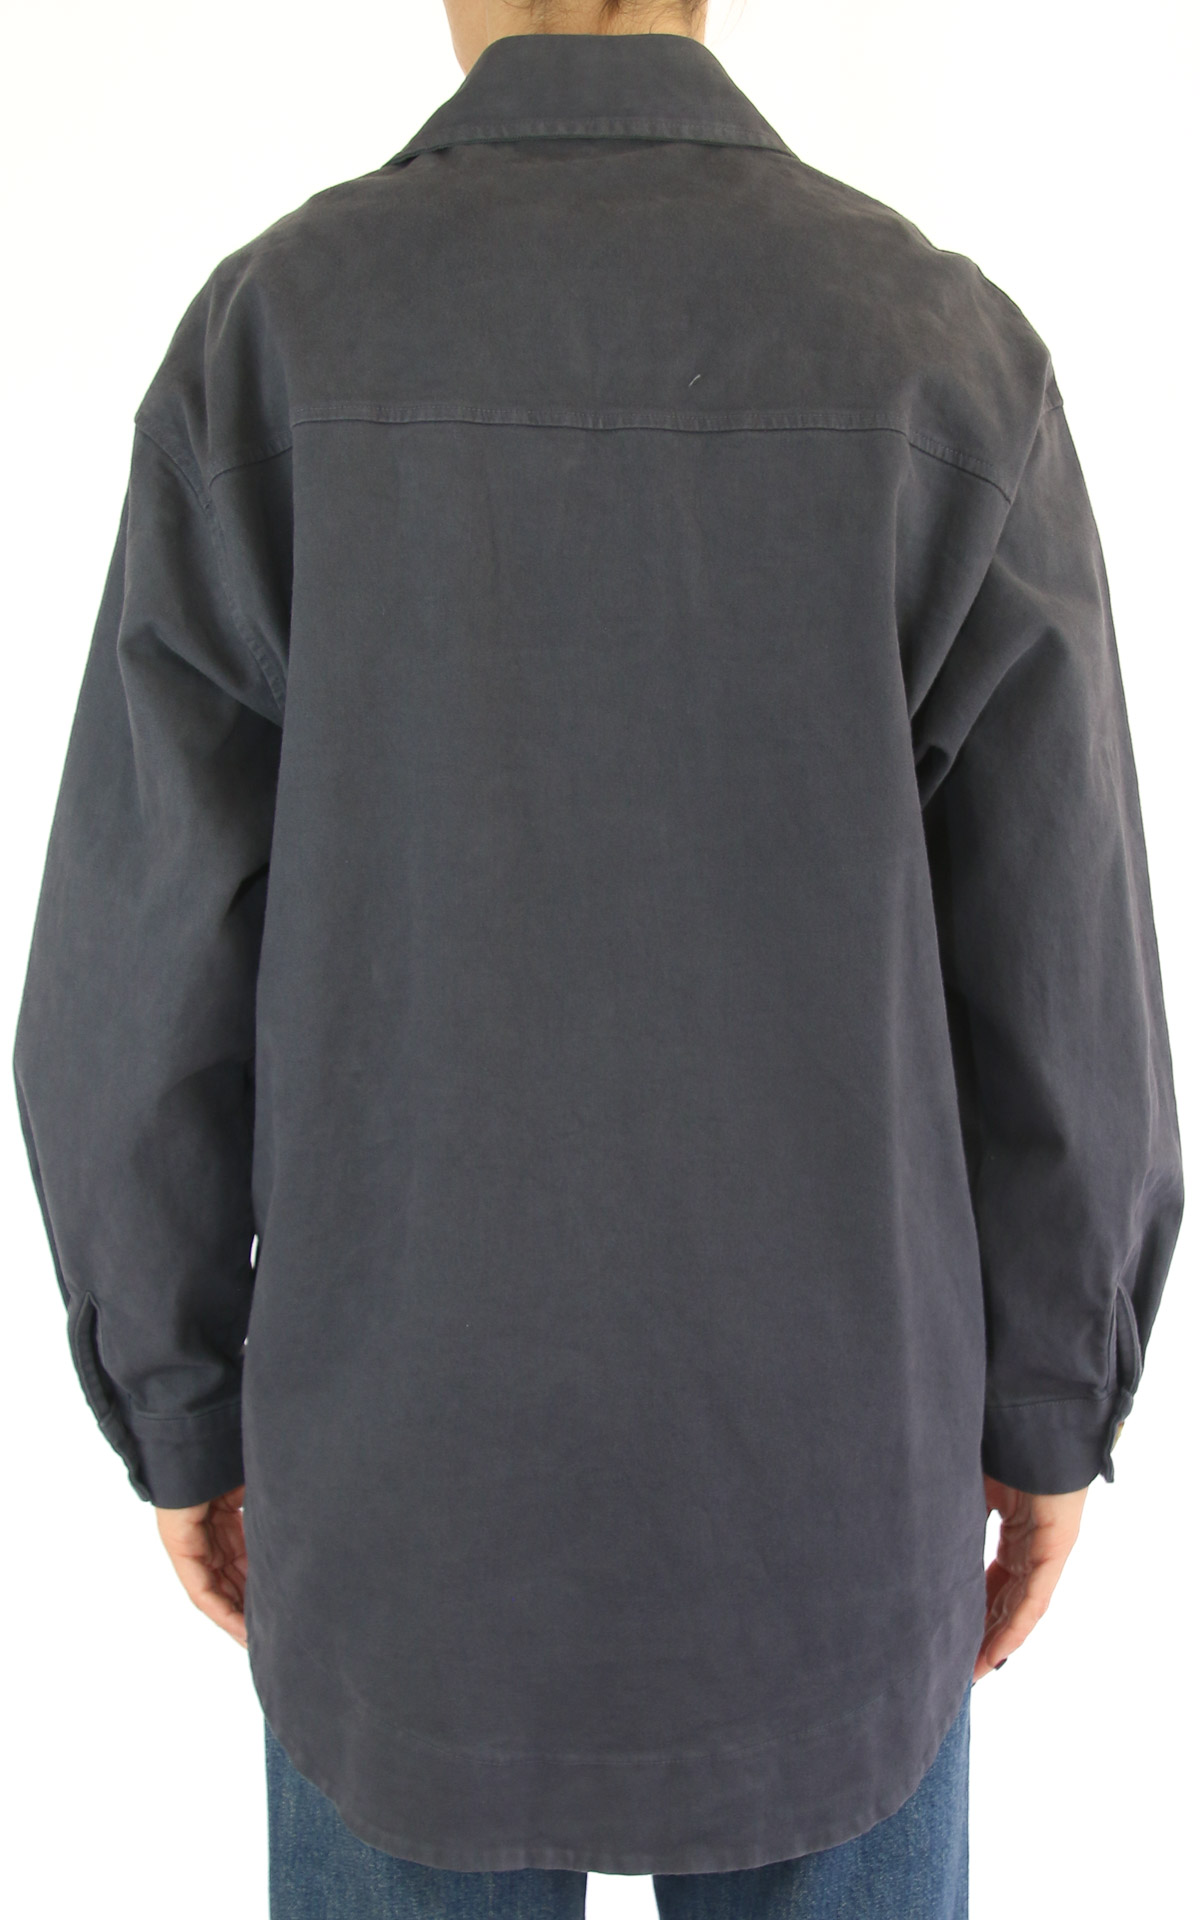 Off-On - giacca oversize - marrone